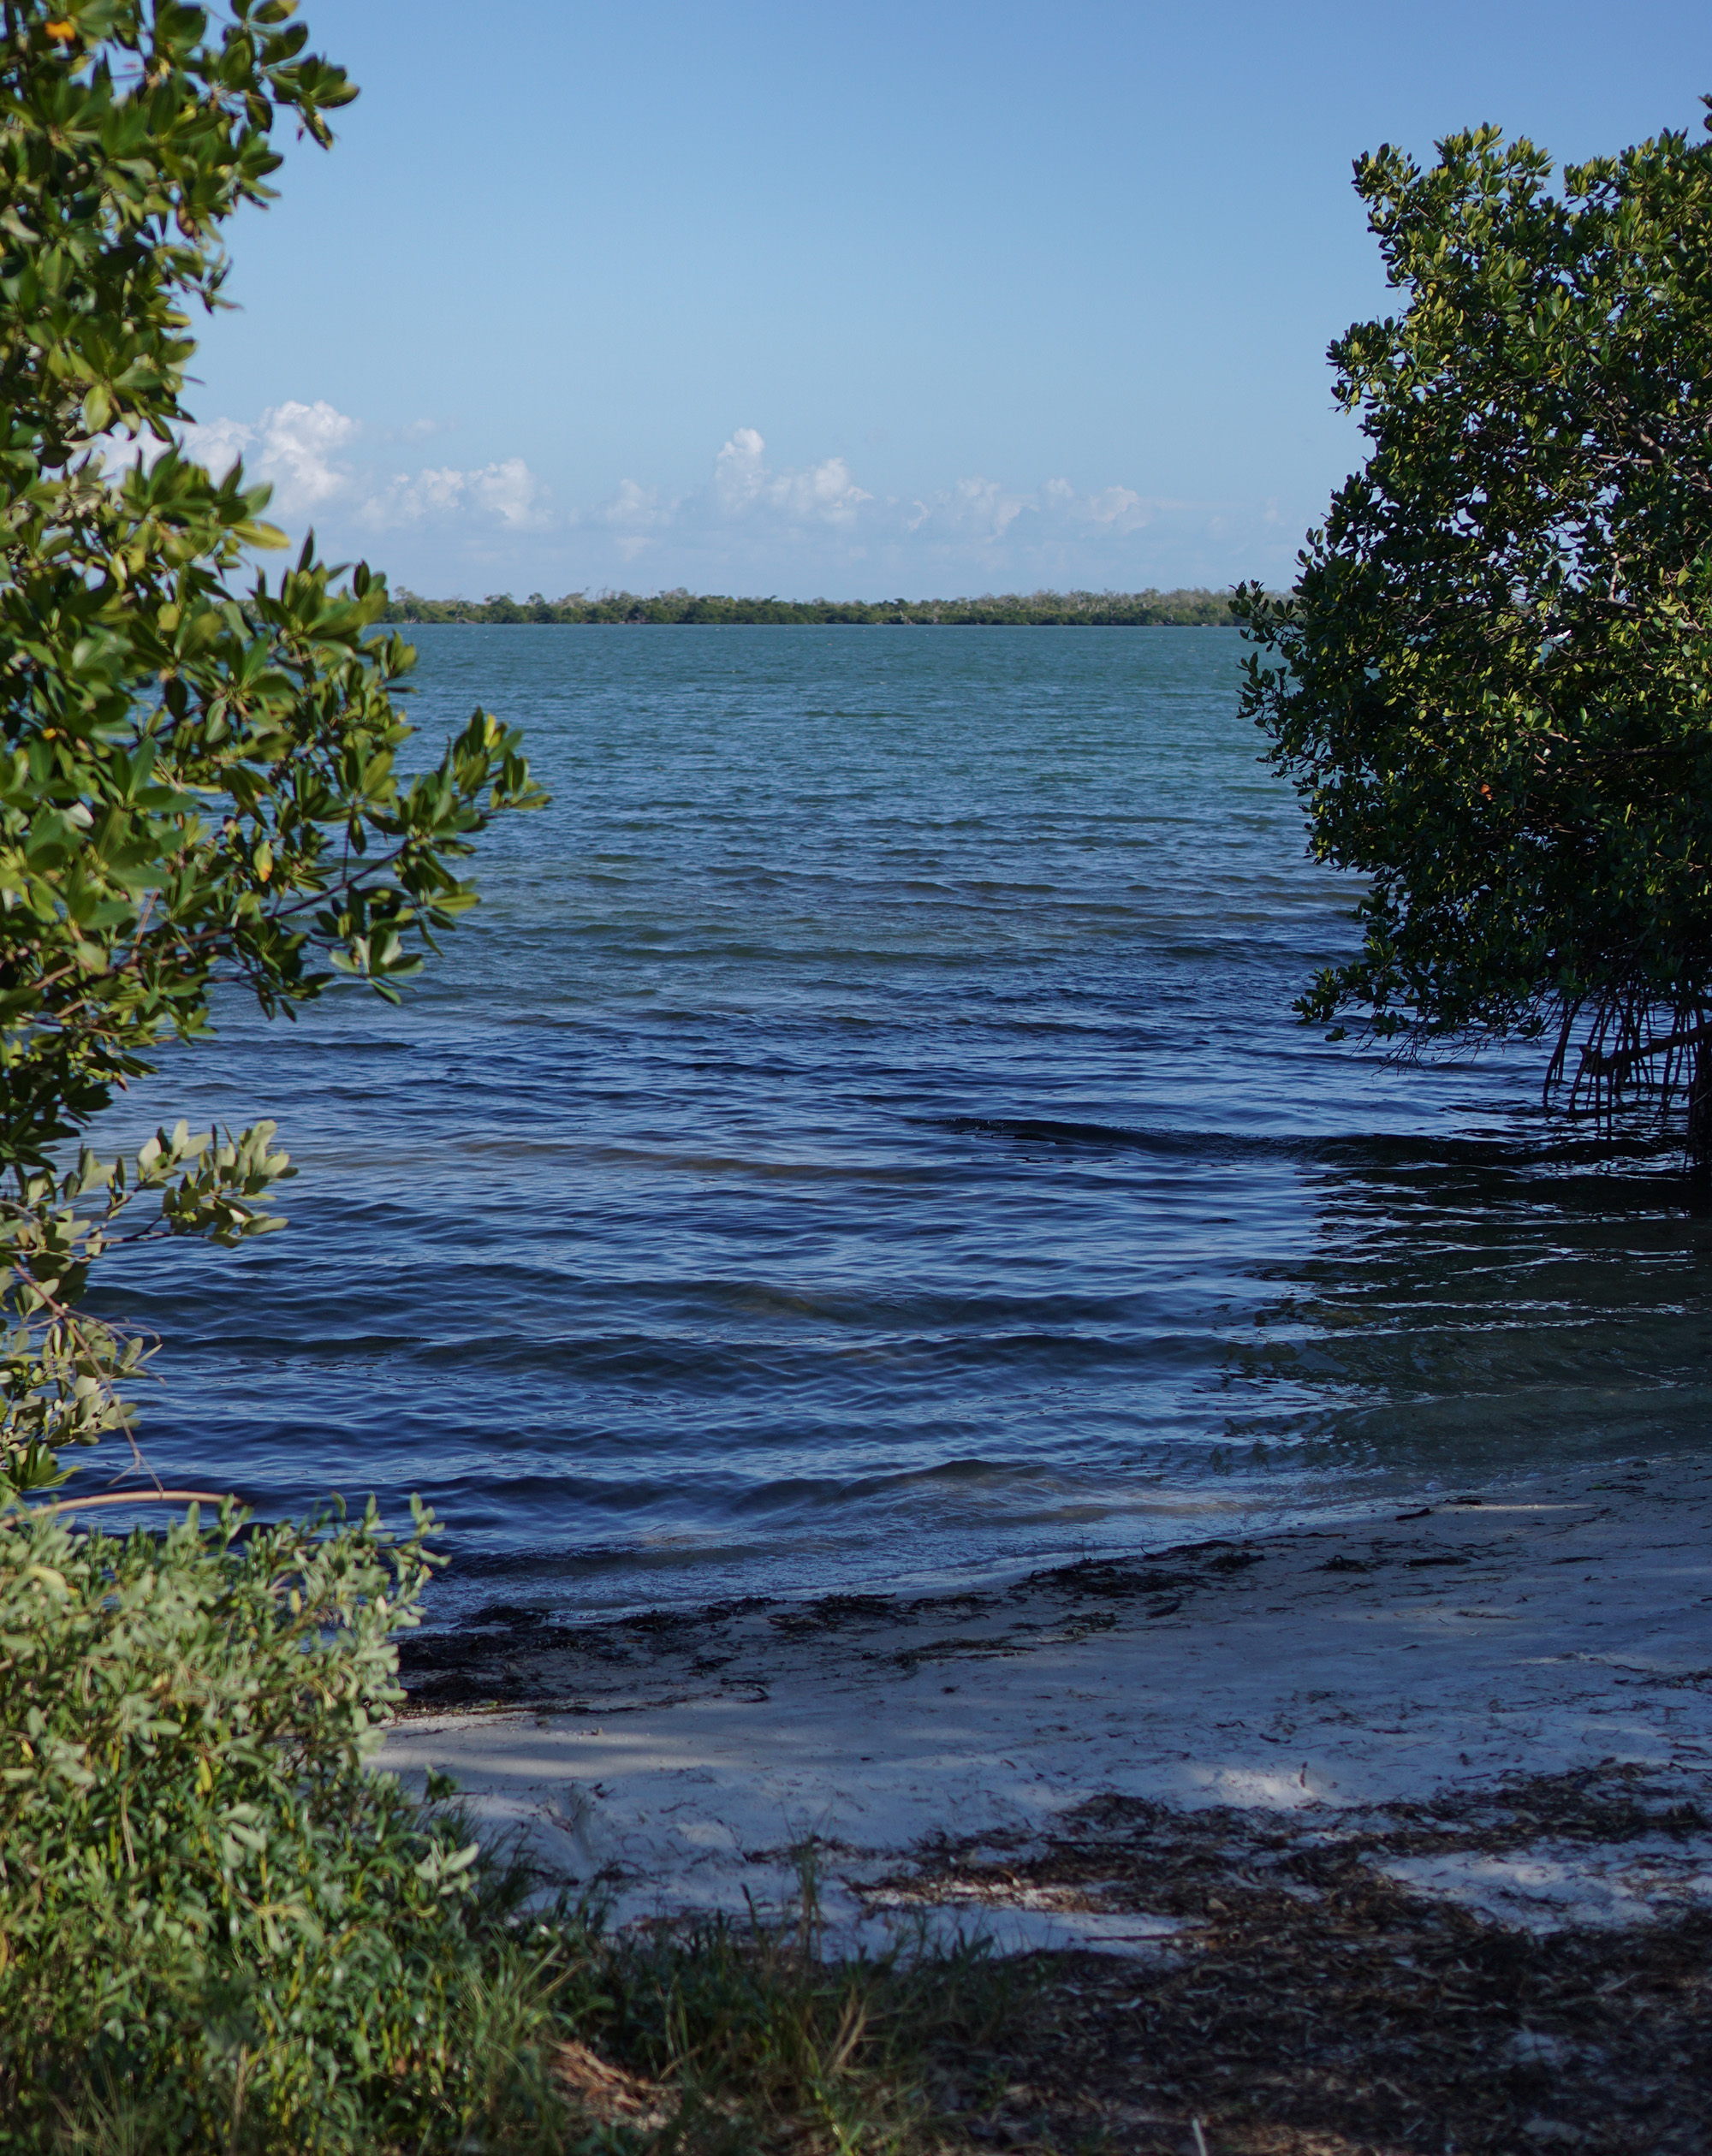 The view toward Pelican Bay from Cayo Costa, Florida / Darker than Green